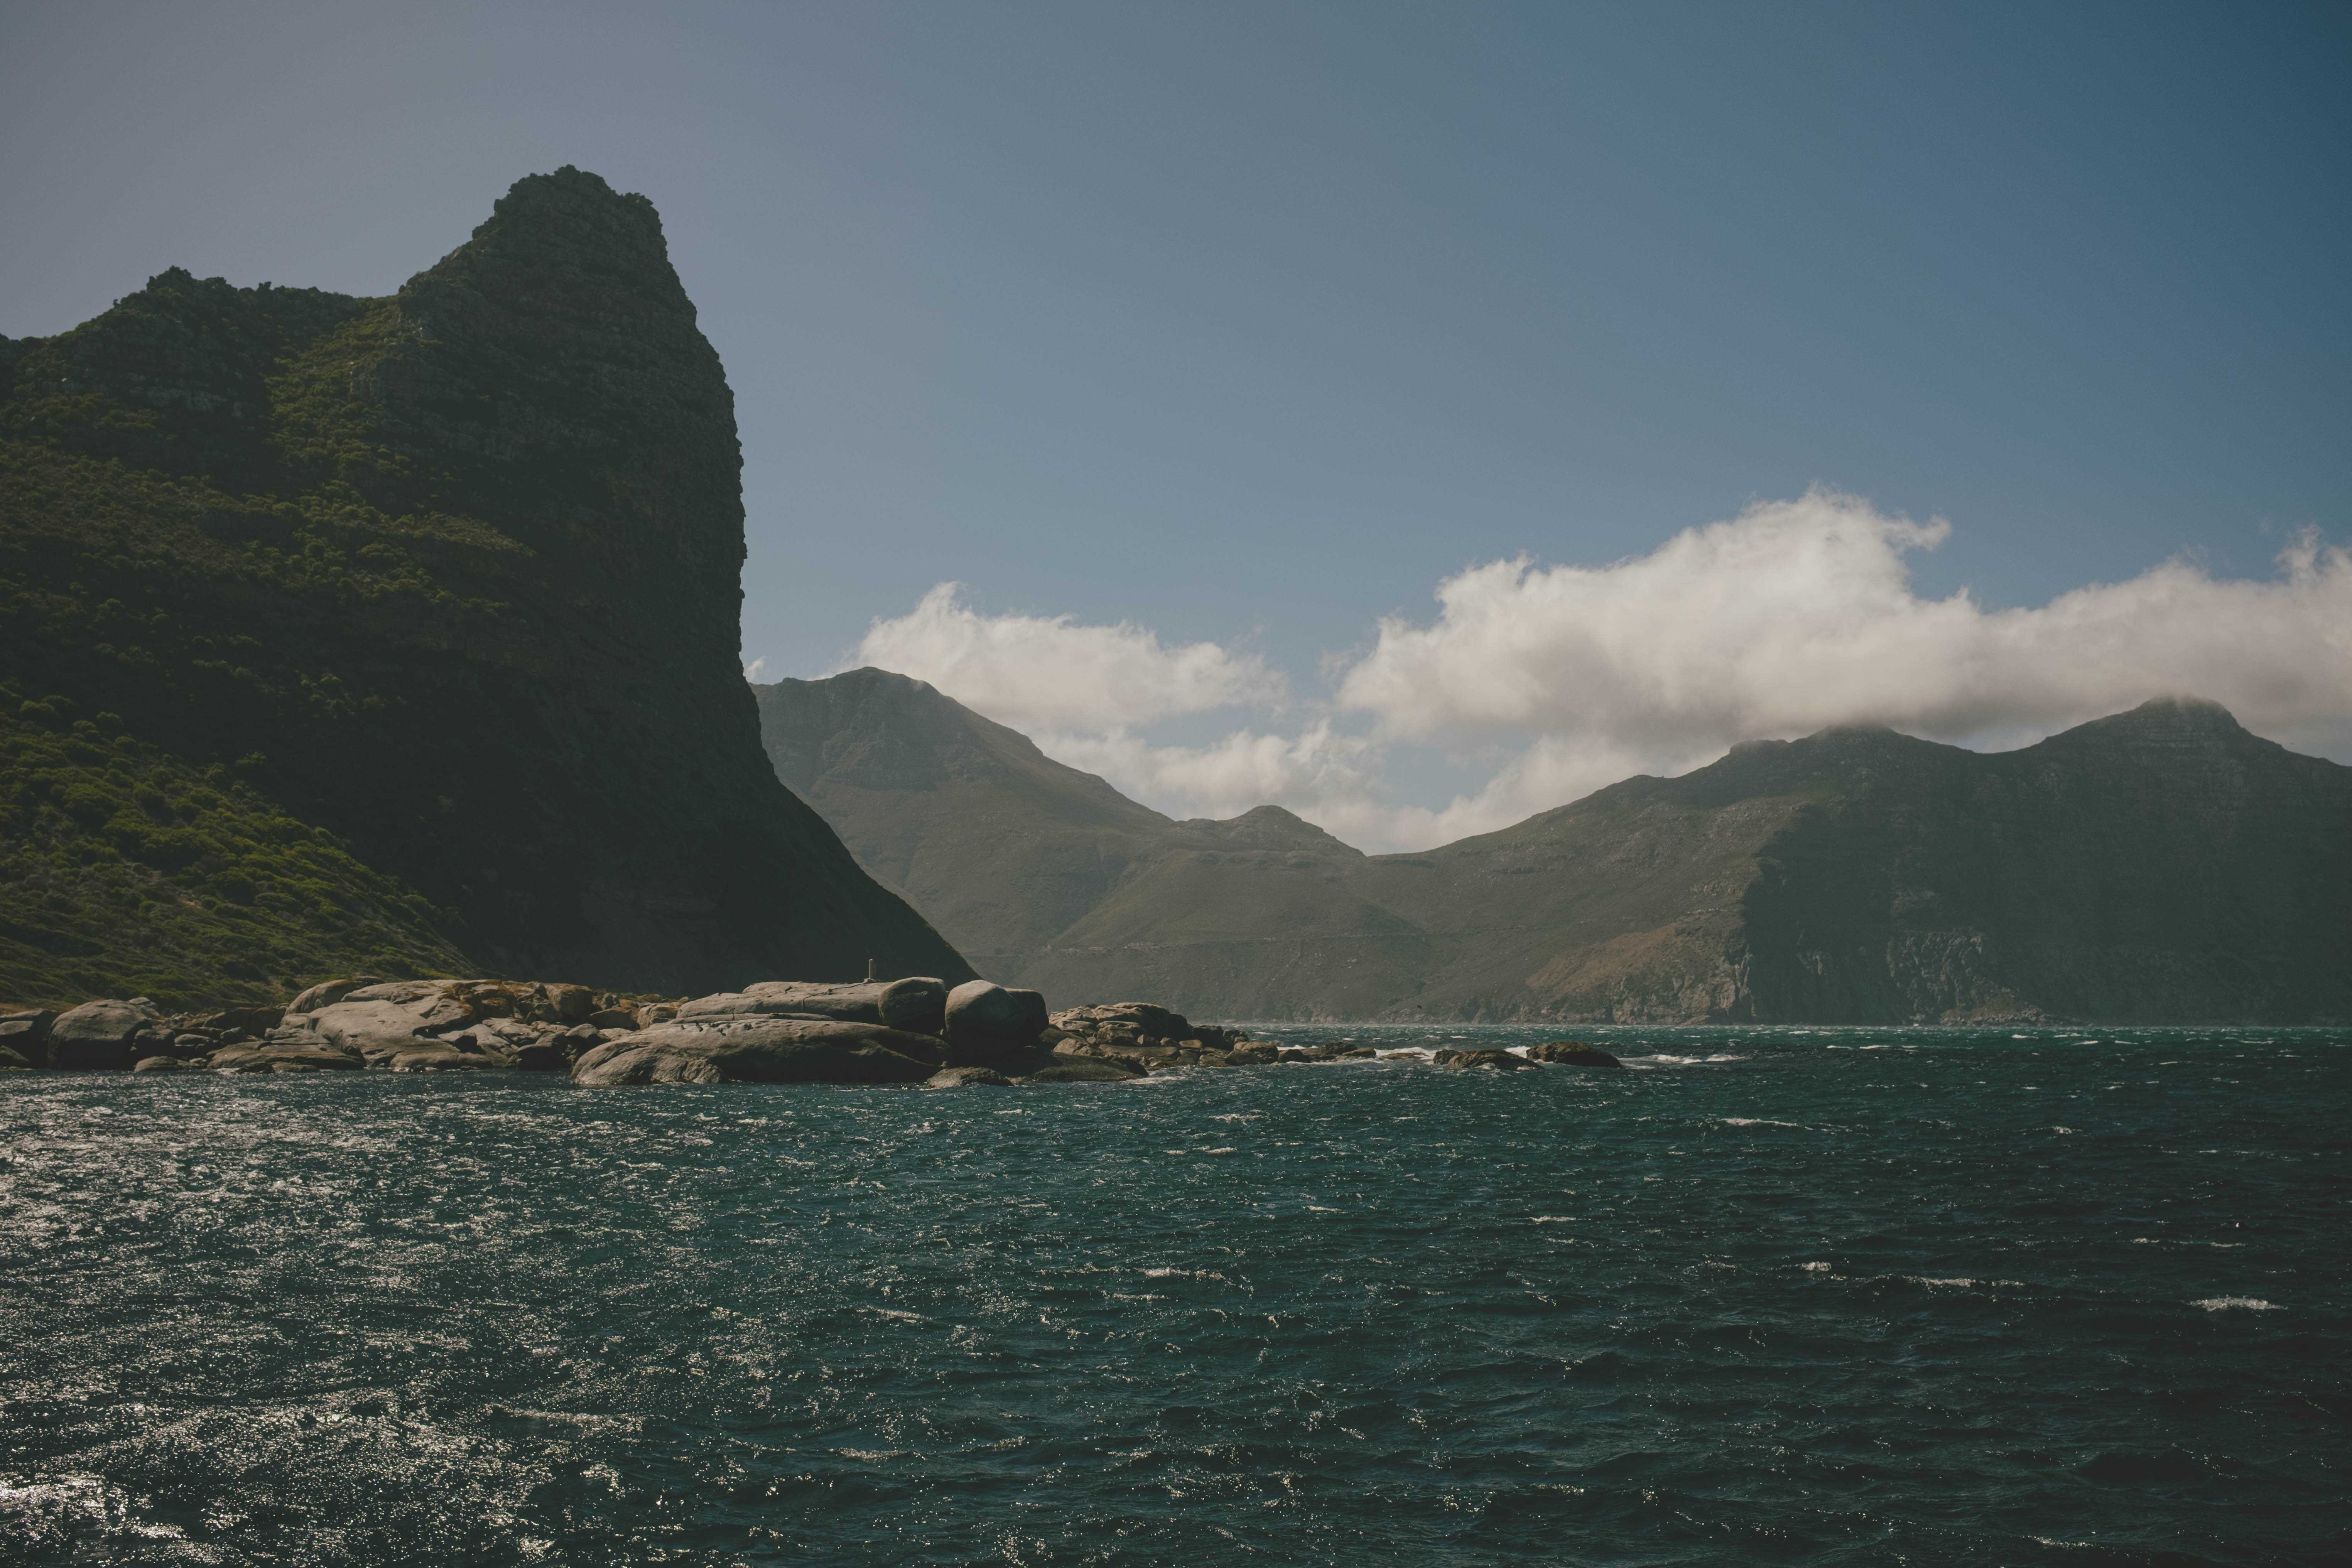 Looking back at Hout Bay from the water. Mountains with a a few clouds in the background.